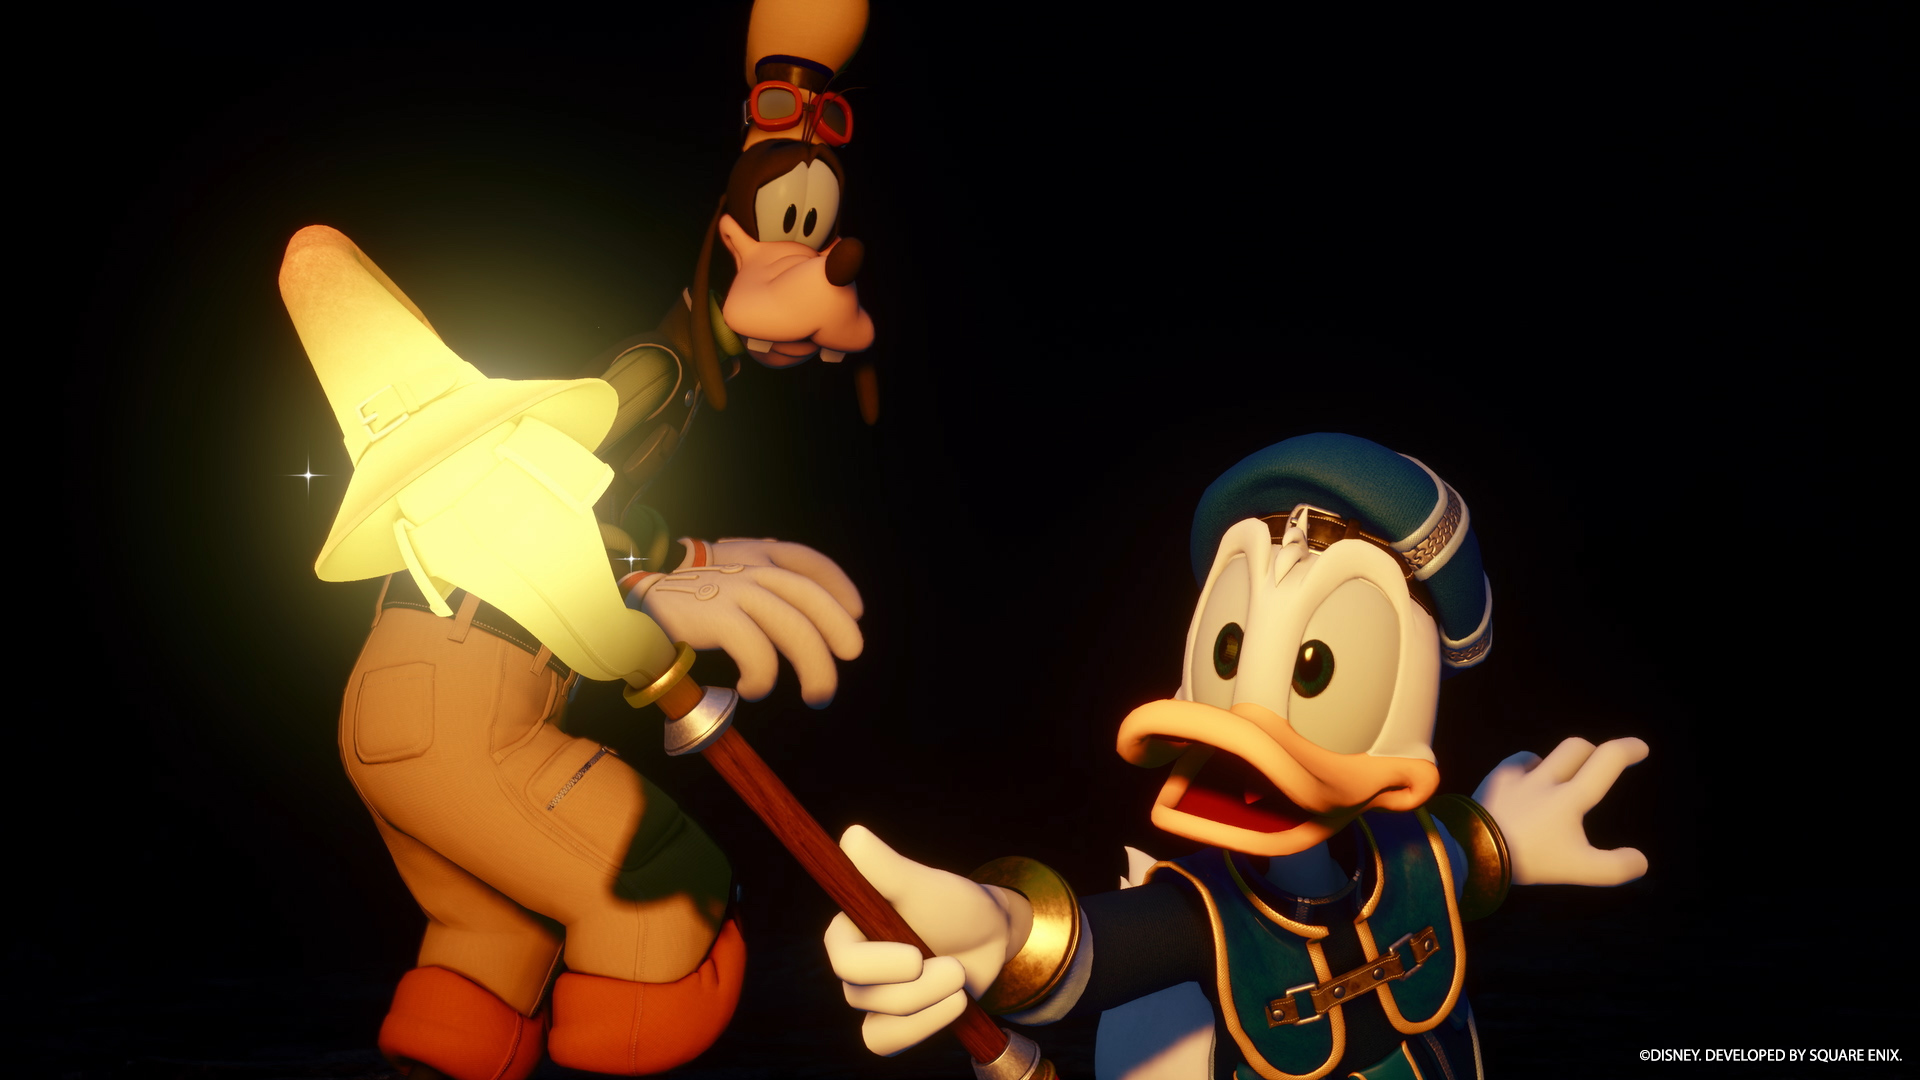 Kingdom Hearts Missing Link Is Looking For Beta Testers - Droid Gamers